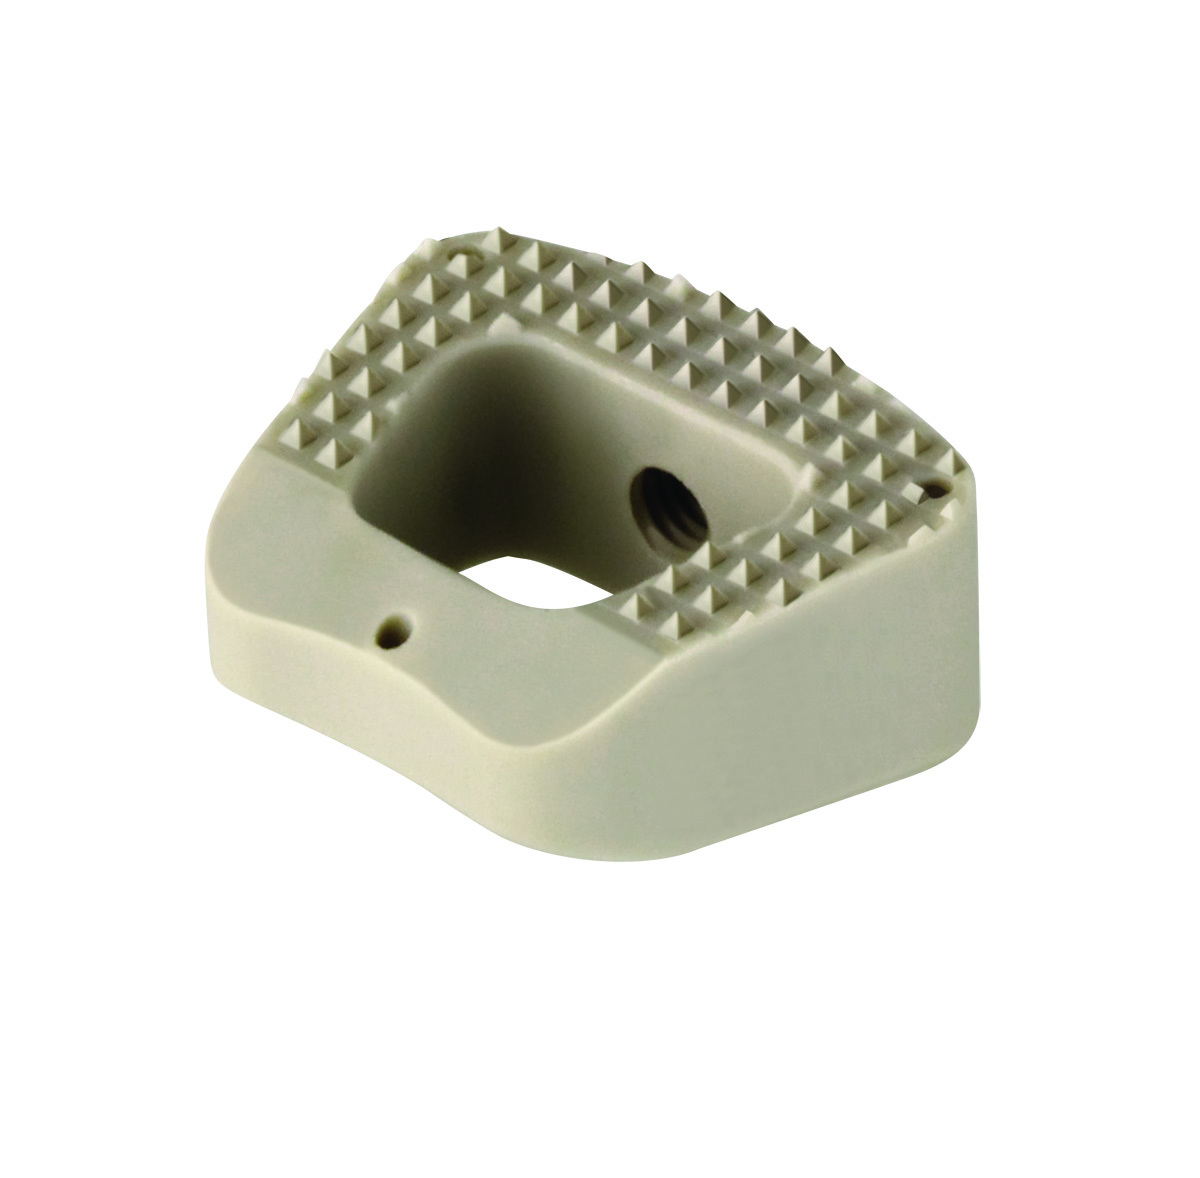 COLONIAL® ACDF Interbody Spacer